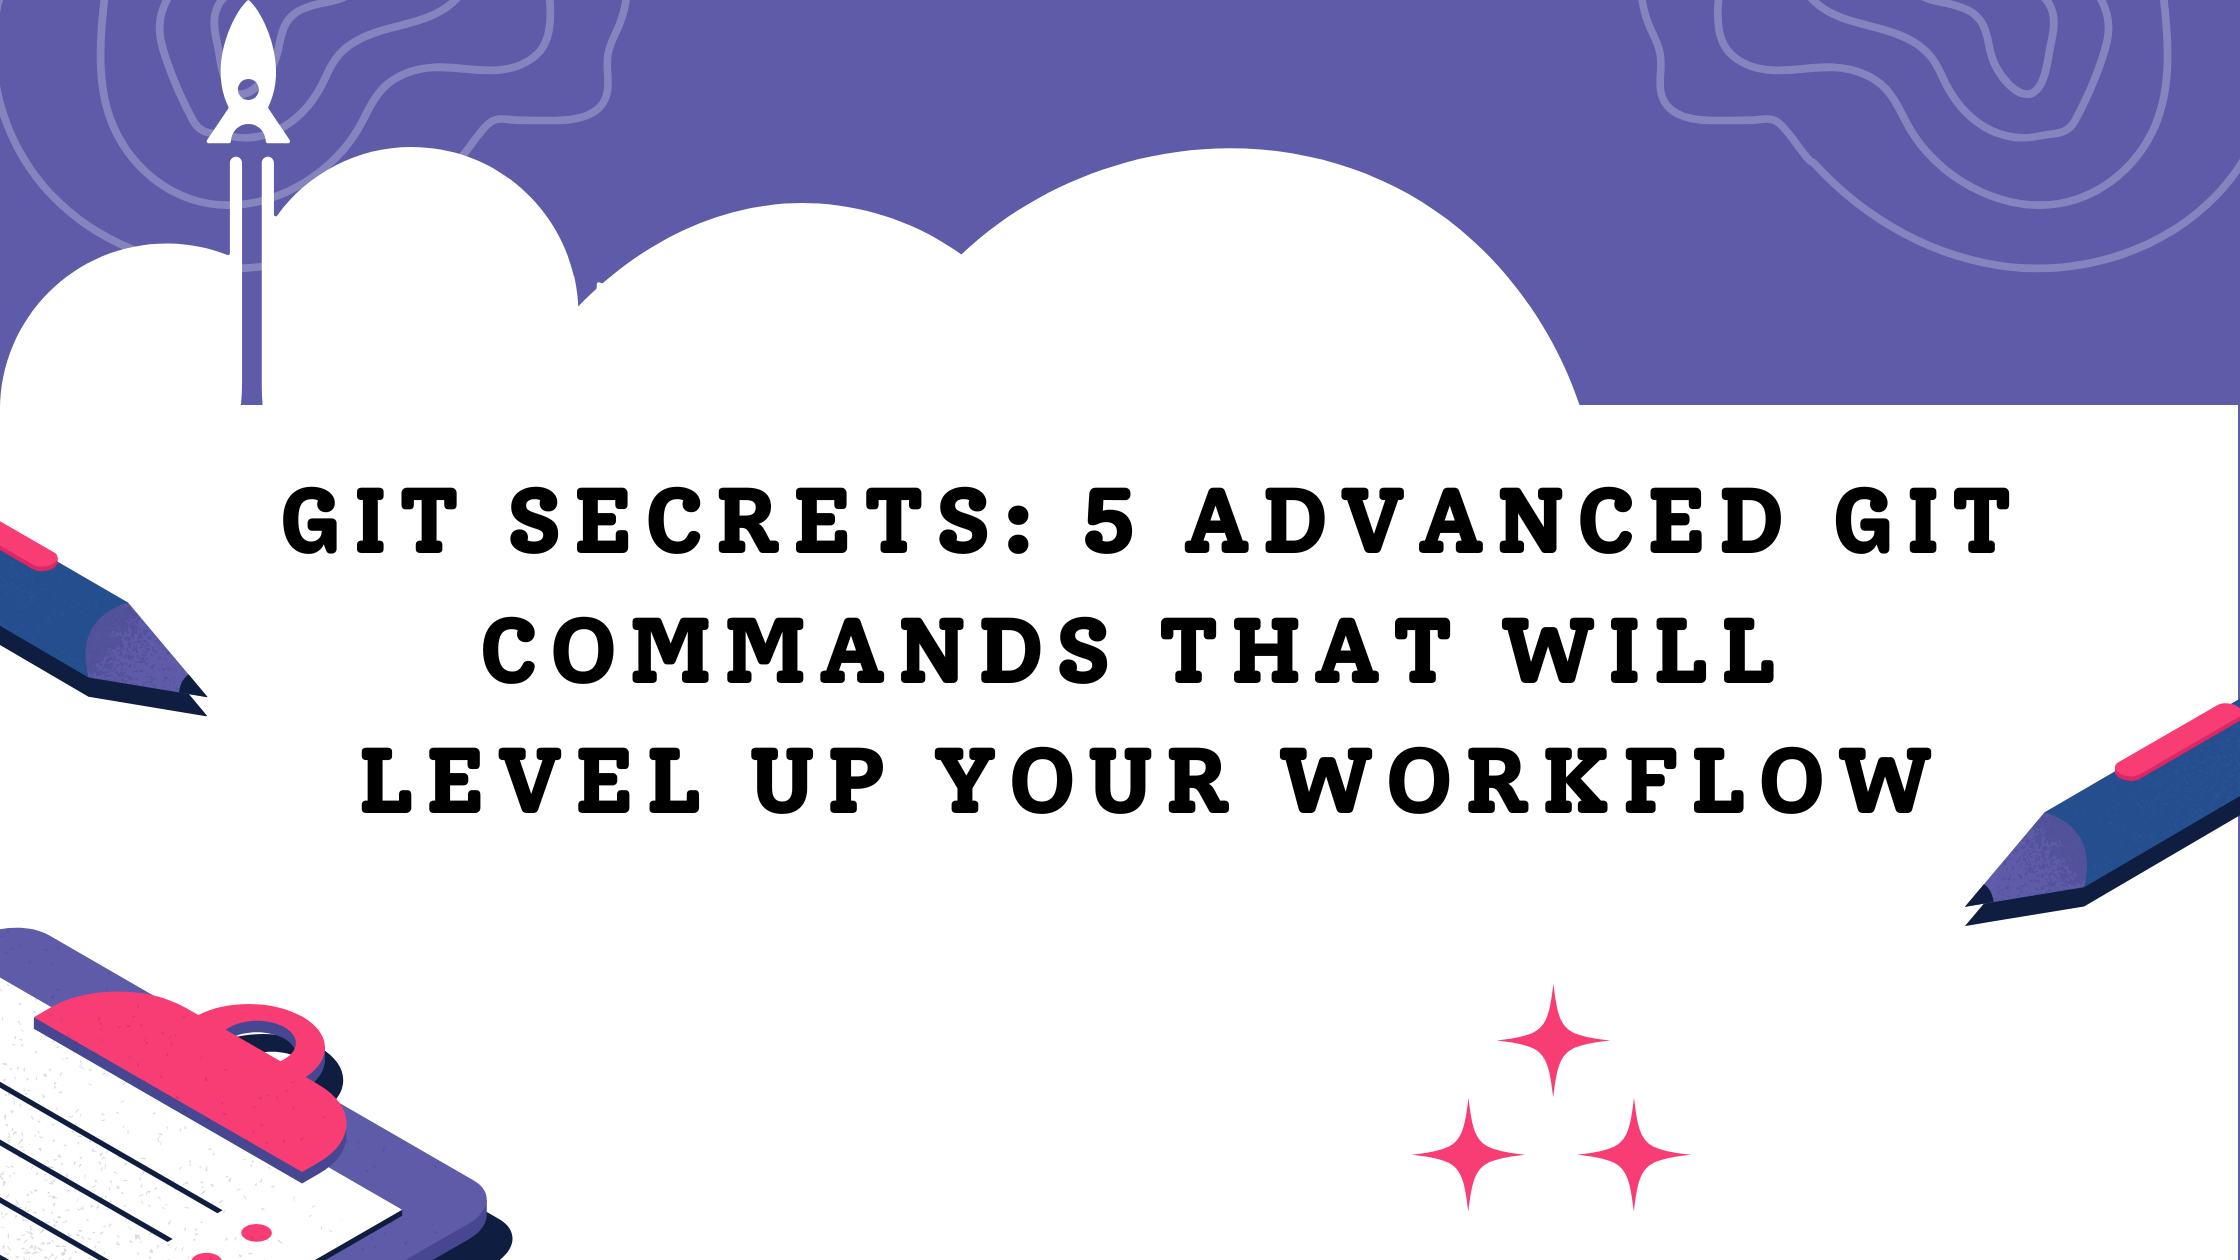 Git Secrets: 5 advanced git commands that will level up your
                workflow